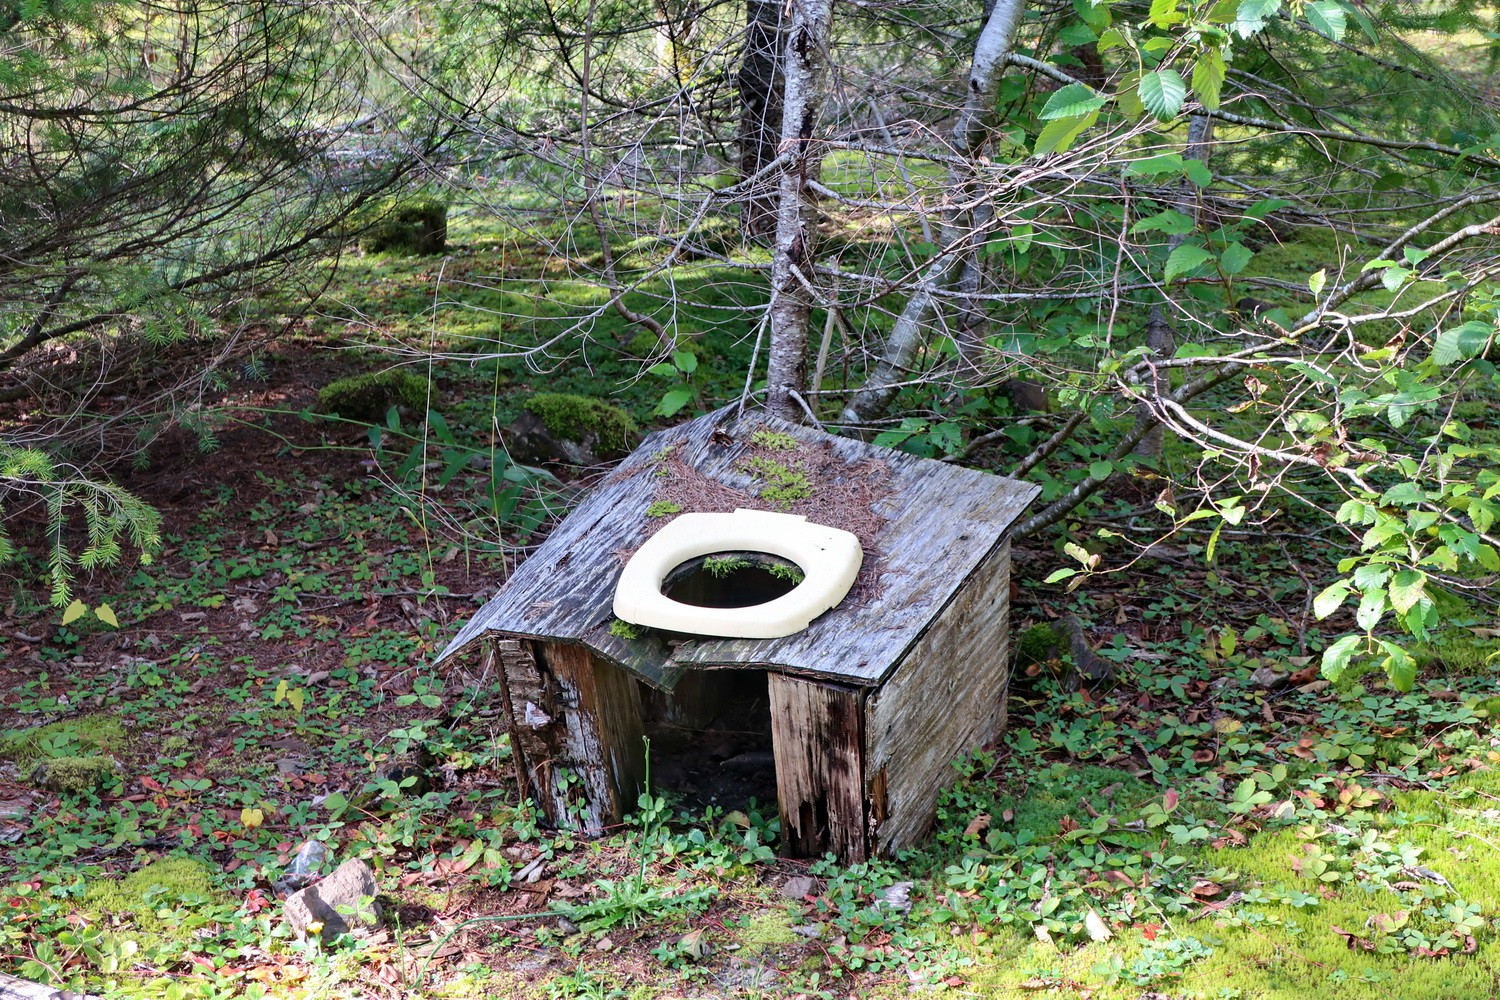 Toilet on the way to the Viewpoint Mount Saint Helens